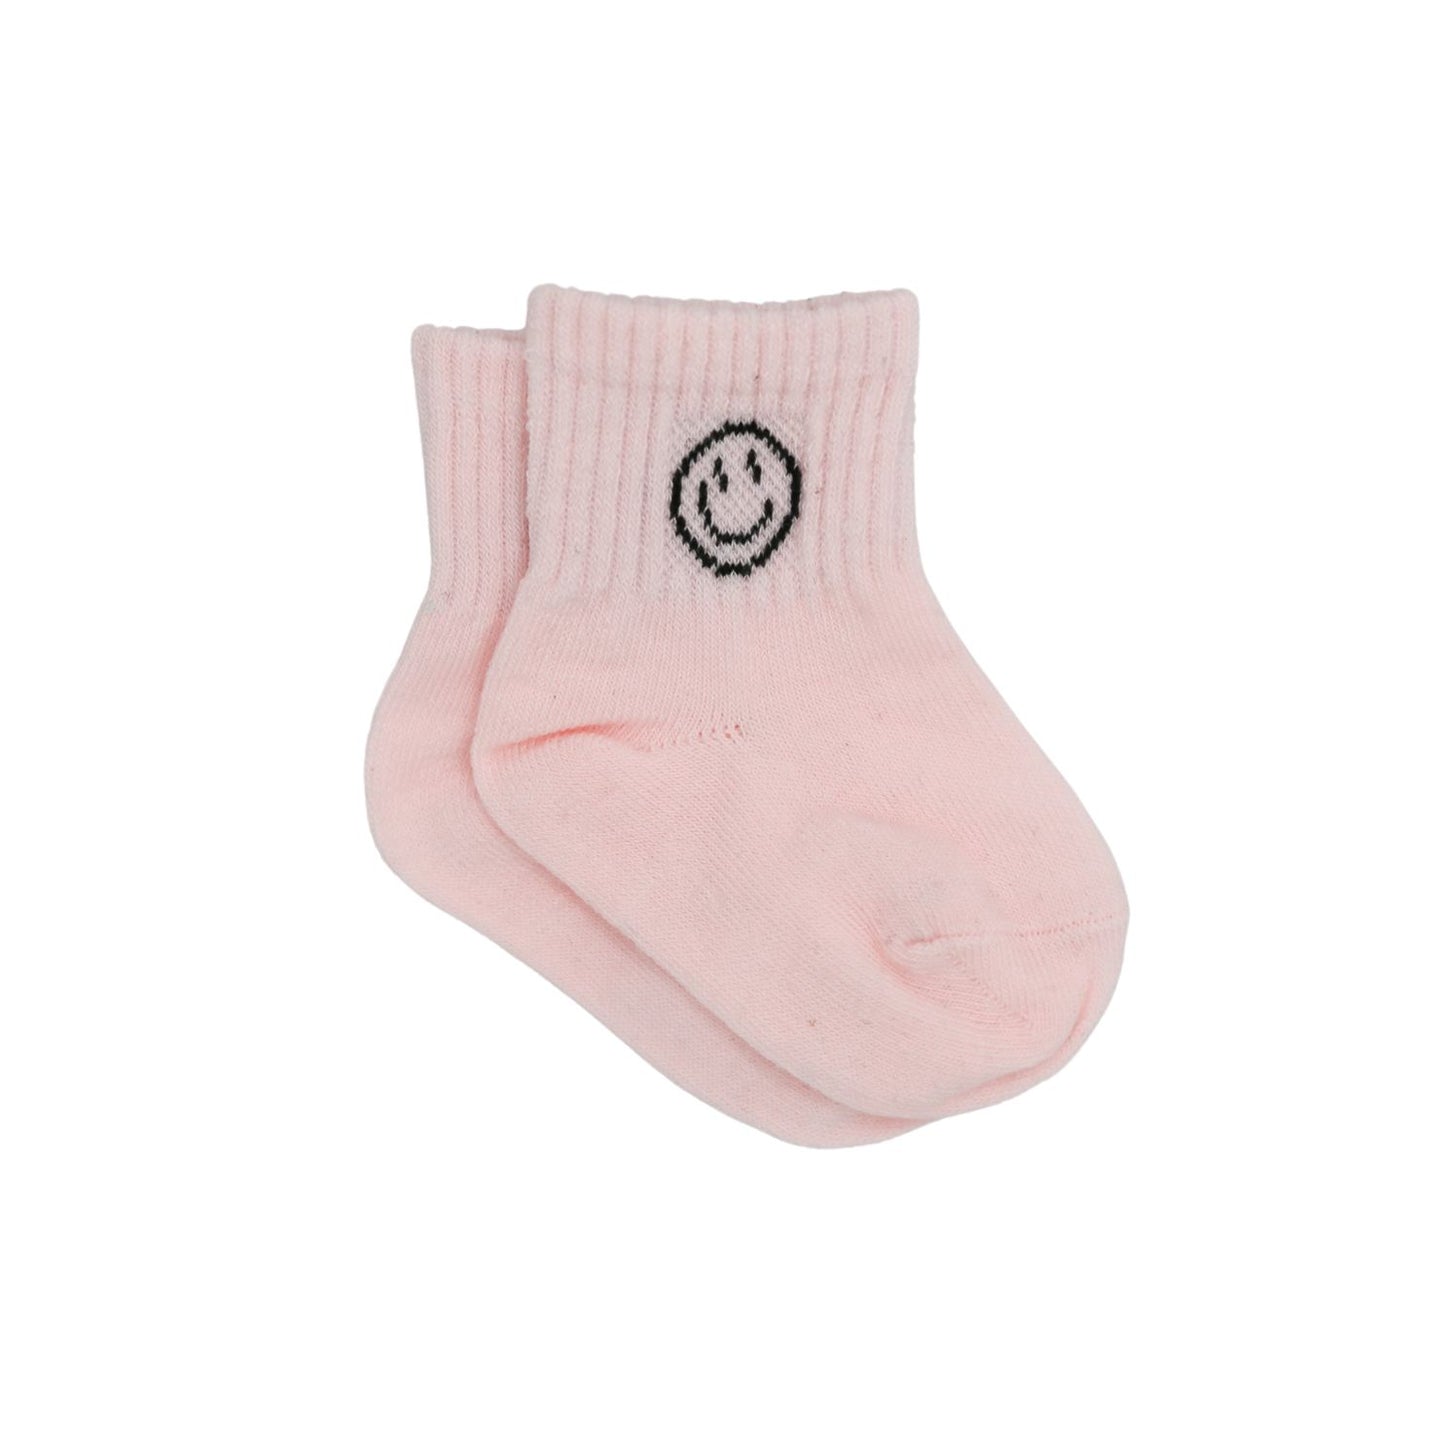 The Baby Cubby Smiling Face Socks - Light Pink